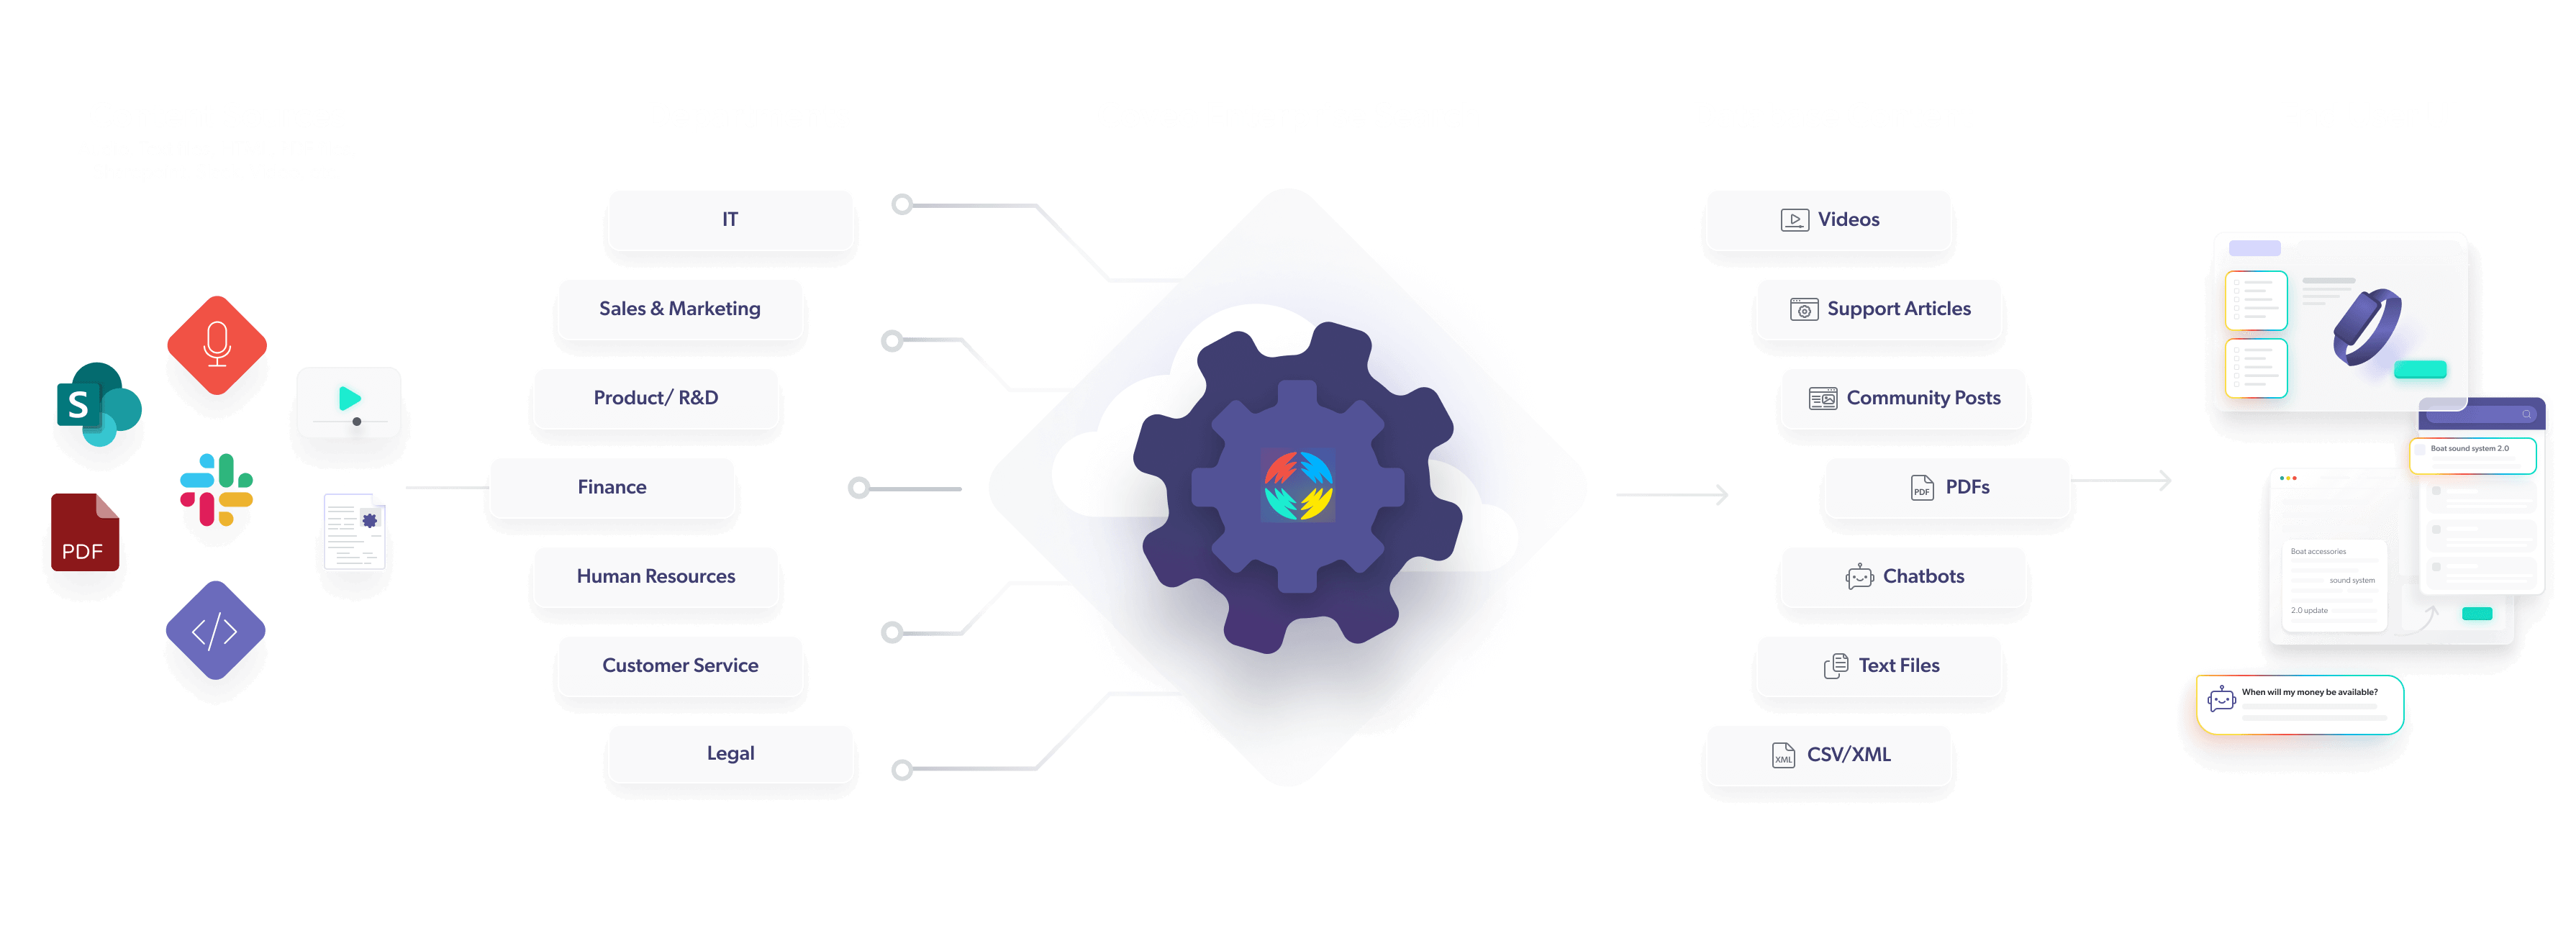 What Use Cases Work With Enterprise Search